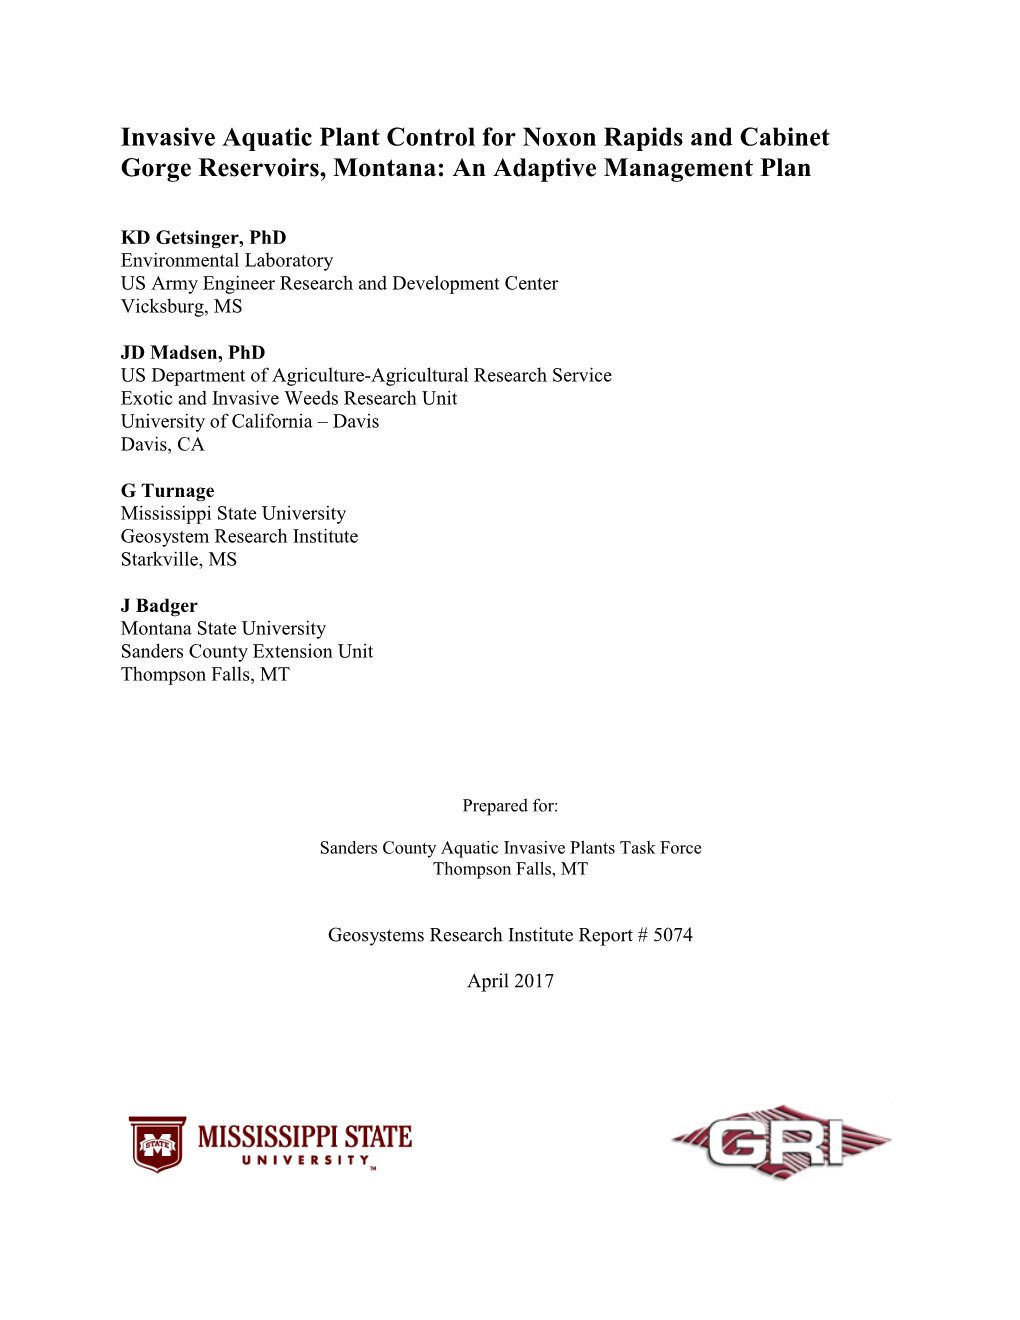 Invasive Aquatic Plant Control for Noxon Rapids and Cabinet Gorge Reservoirs, Montana: an Adaptive Management Plan